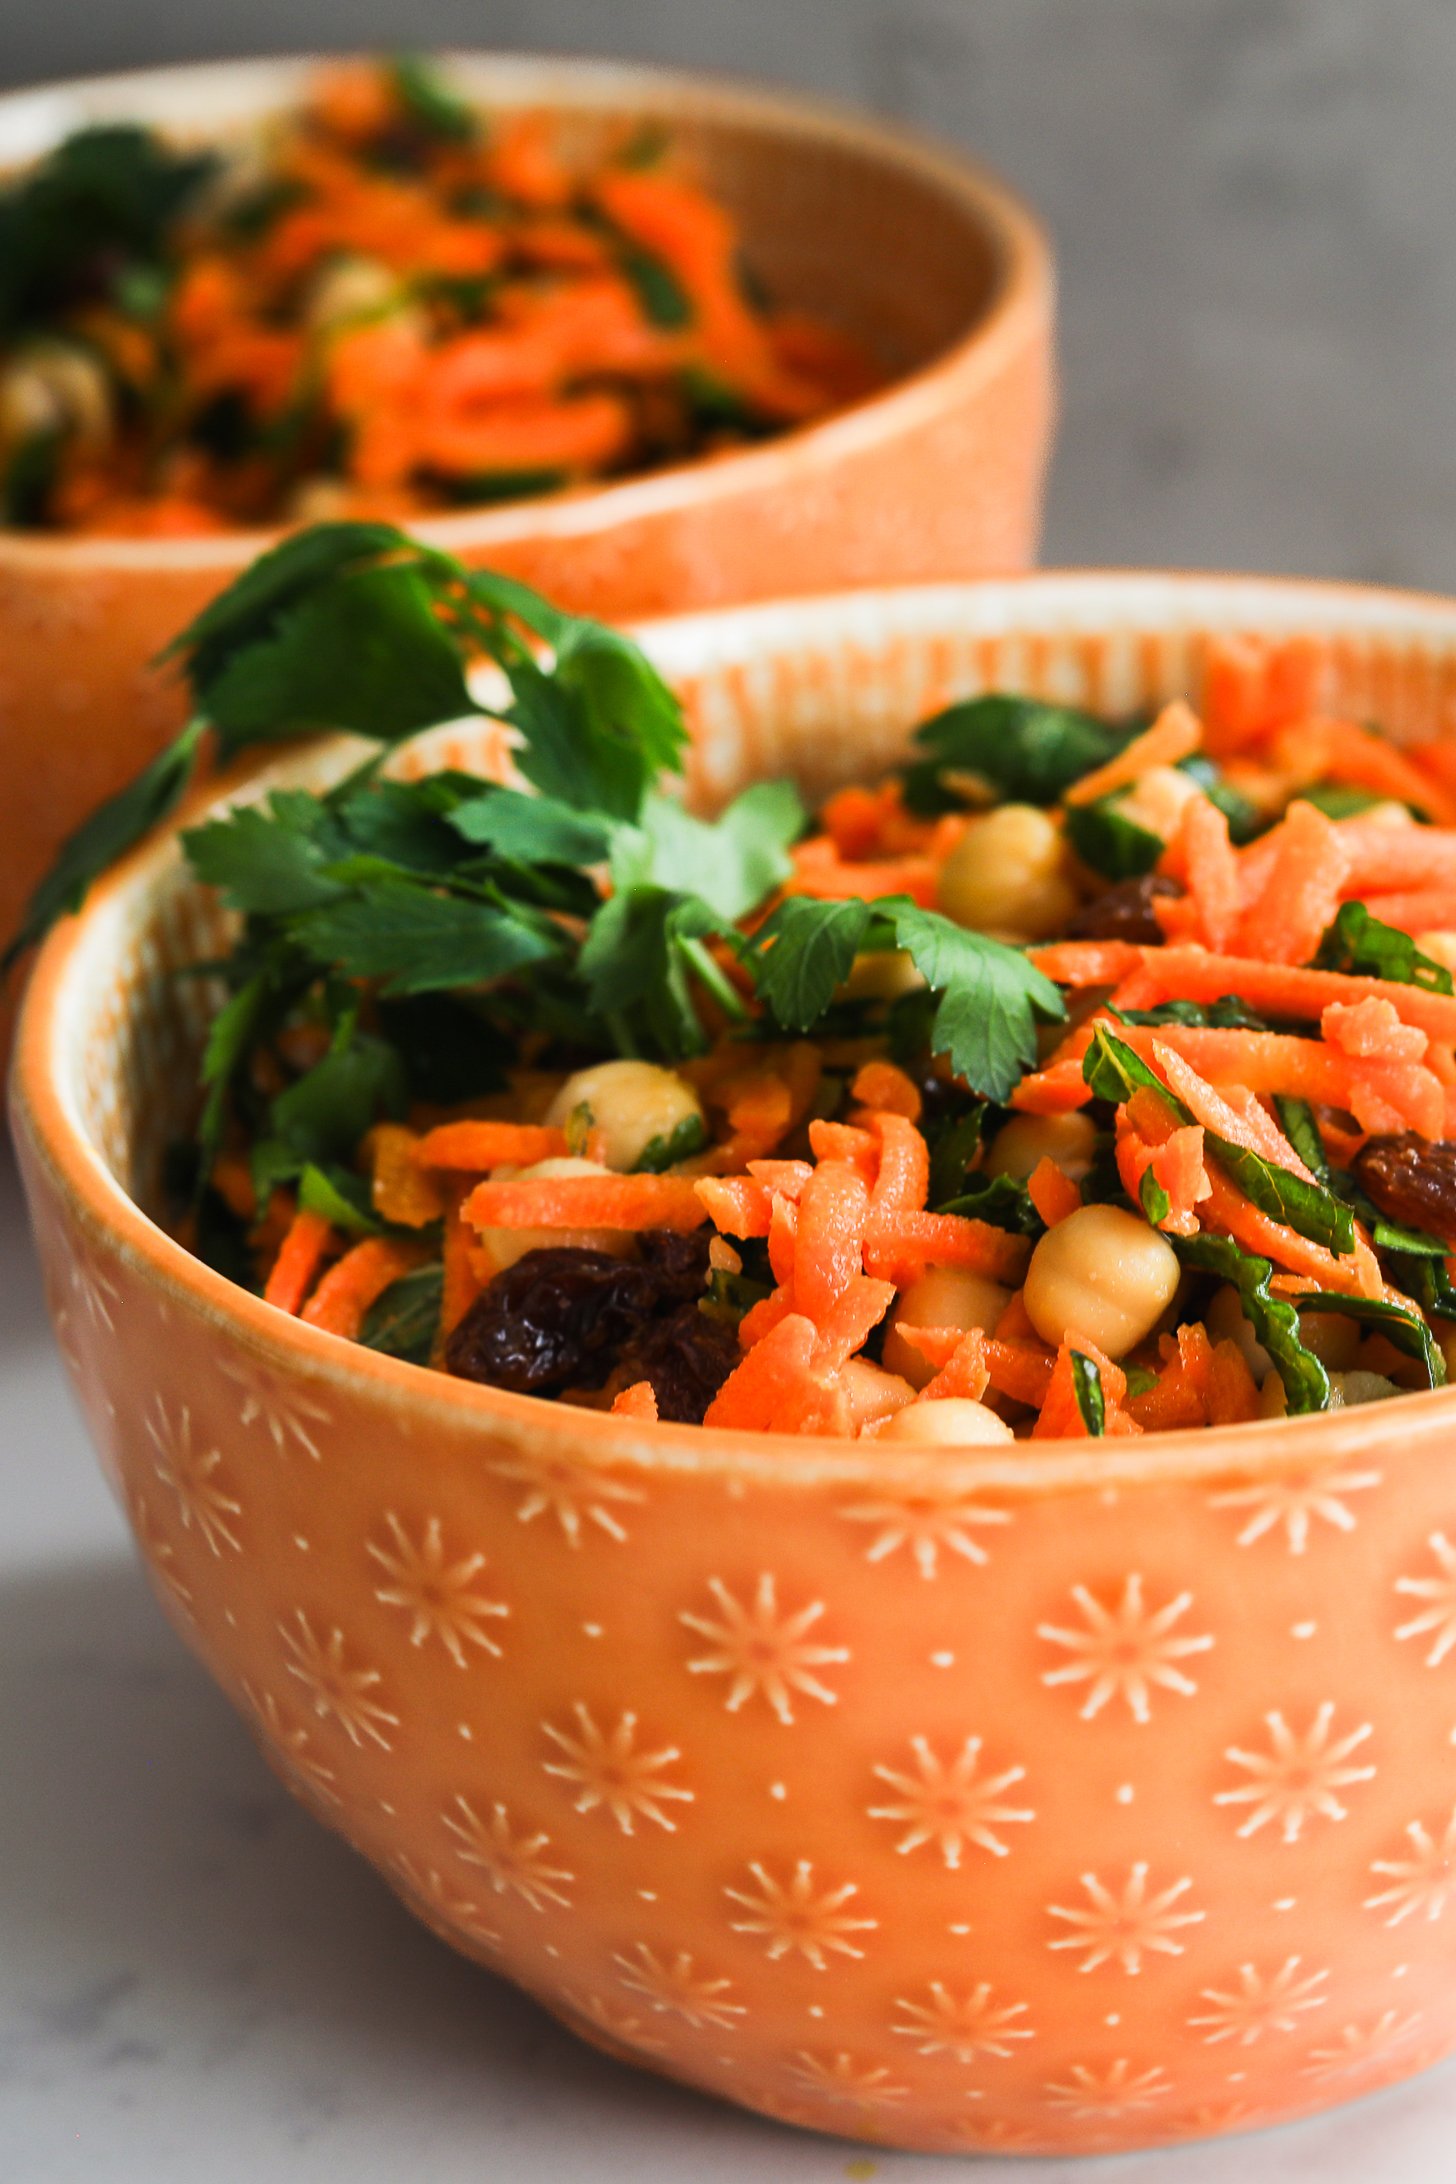 Close-up of two orange bowls filled with grated carrot salad with chickpeas, raisins, and herbs.